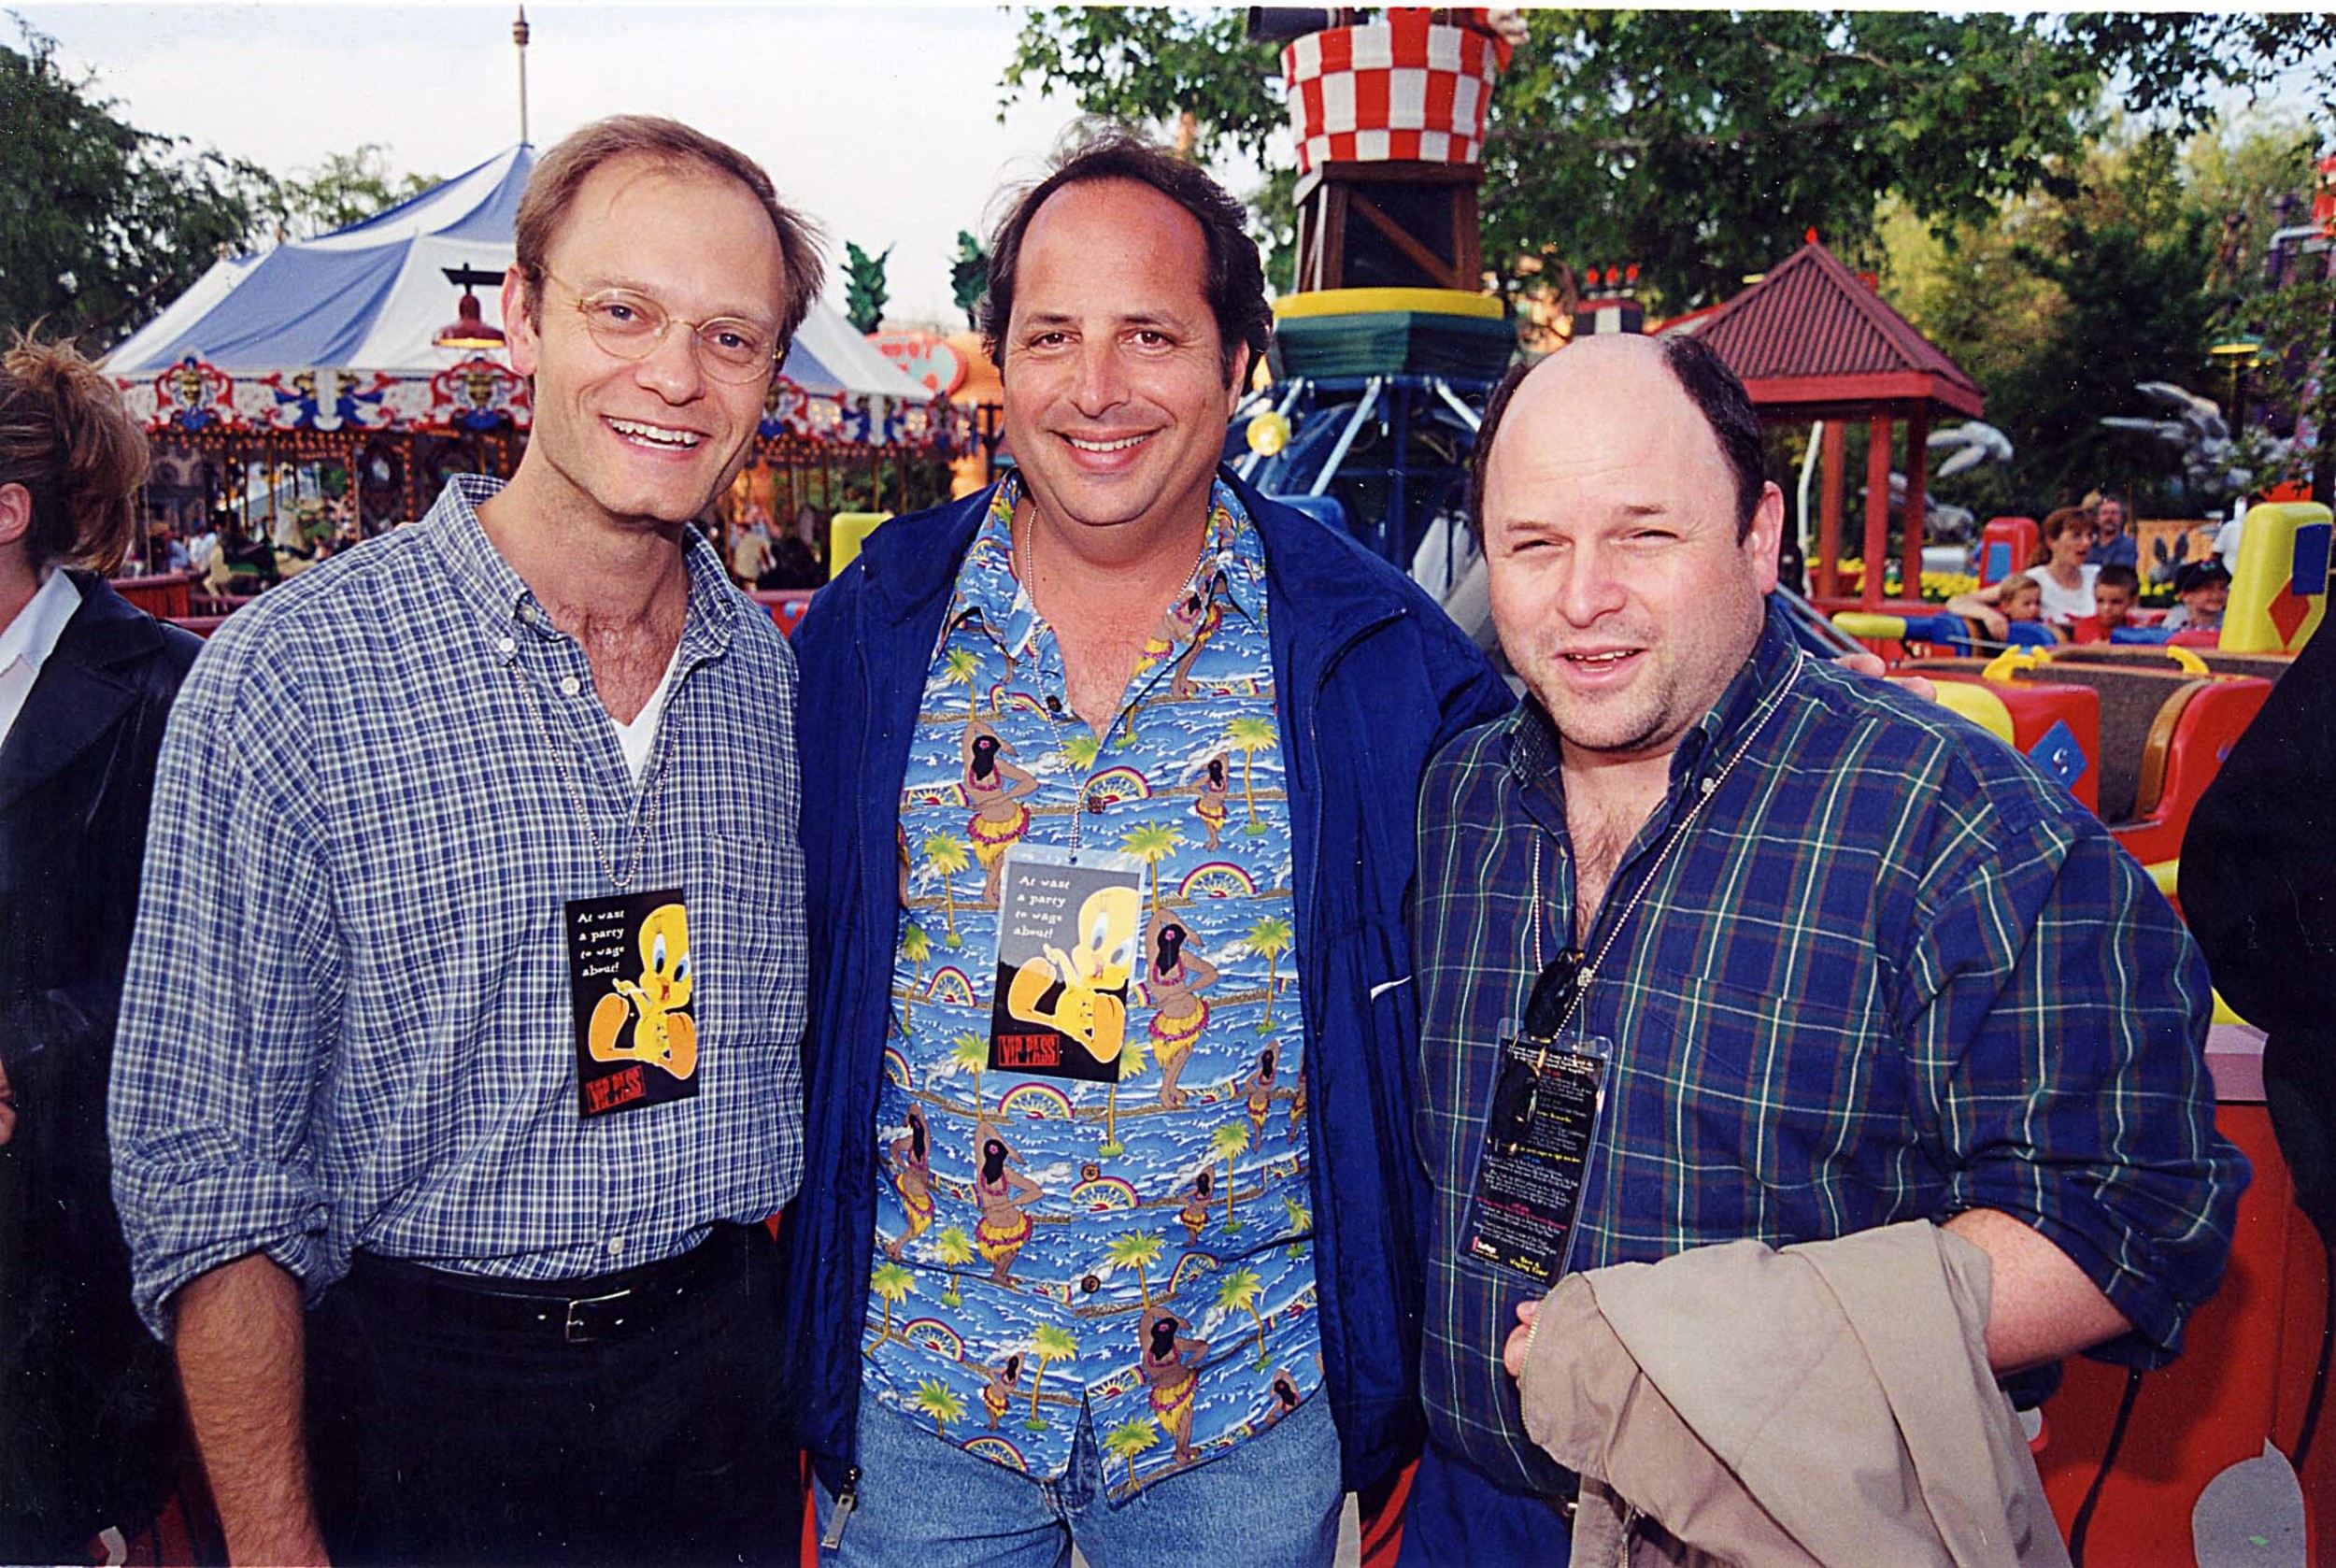 <p>Lovitz was famous prior to his appearance on “Seinfeld.” He had already been on “Saturday Night Live” for years and voiced Jay Sherman for the entire run of “The Critic.” Lovitz is an idiosyncratic performer, but he was a delight as a less-than-delightful friend of Jerry and George who pretends he had cancer.</p>